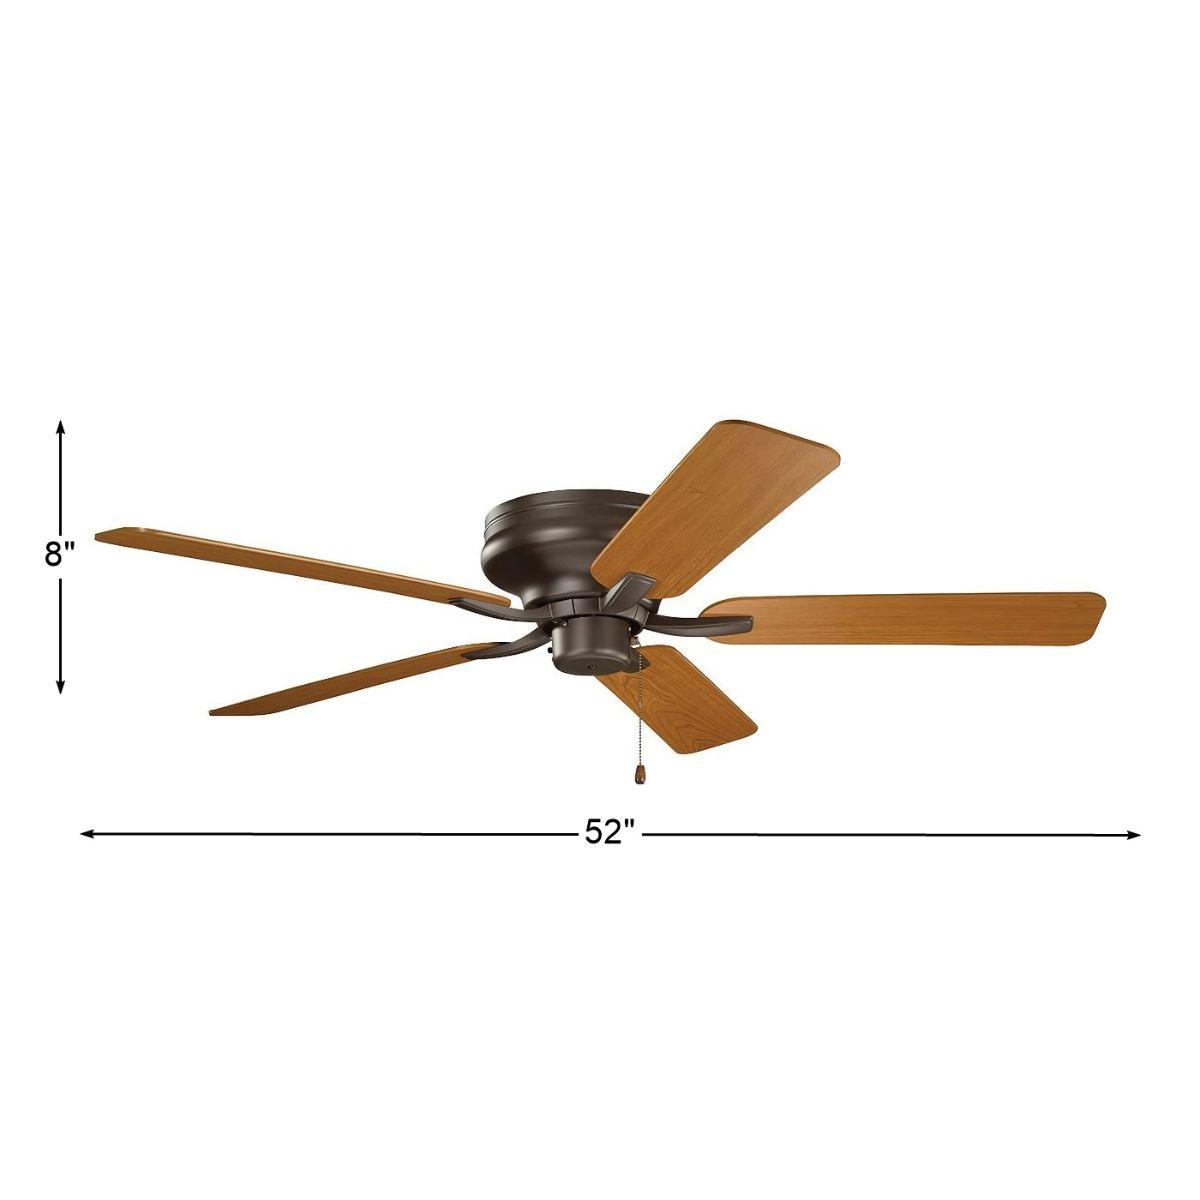 Basics Pro 52 Inch Low Profile Ceiling Fan With Pull Chain